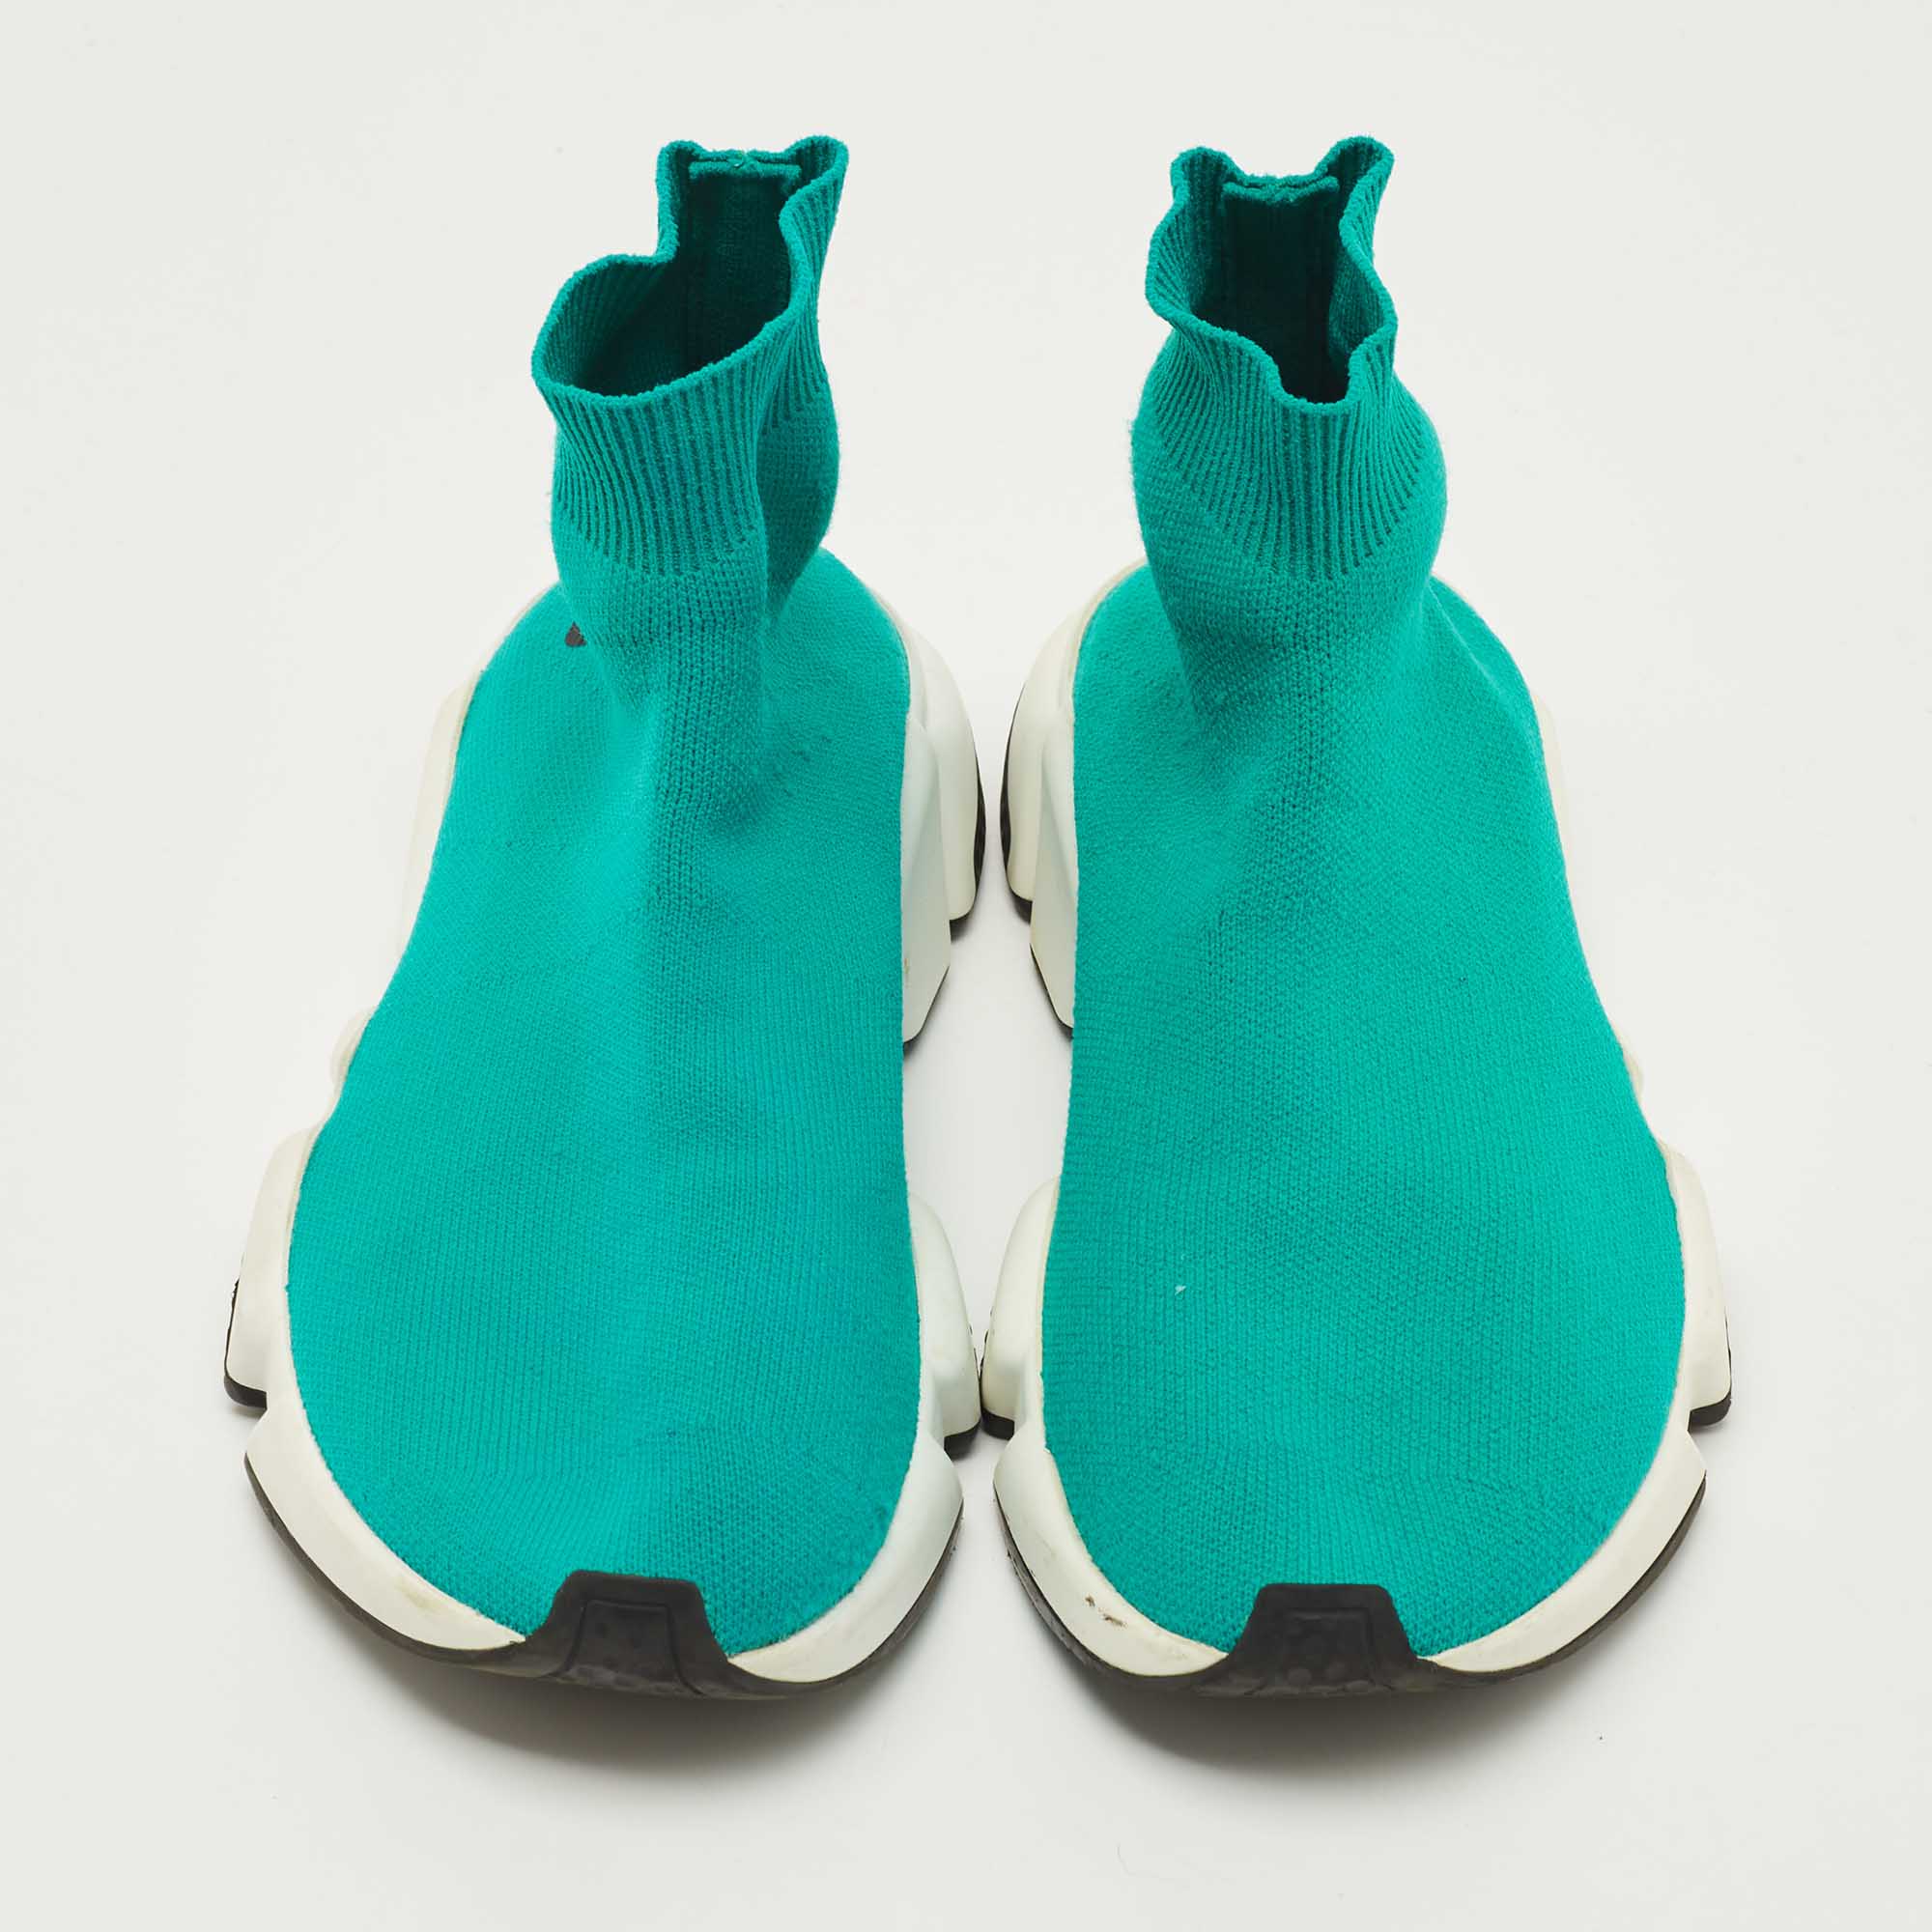 Balenciaga Turquoise Knit Fabric Speed Trainer Sneakers Size 35